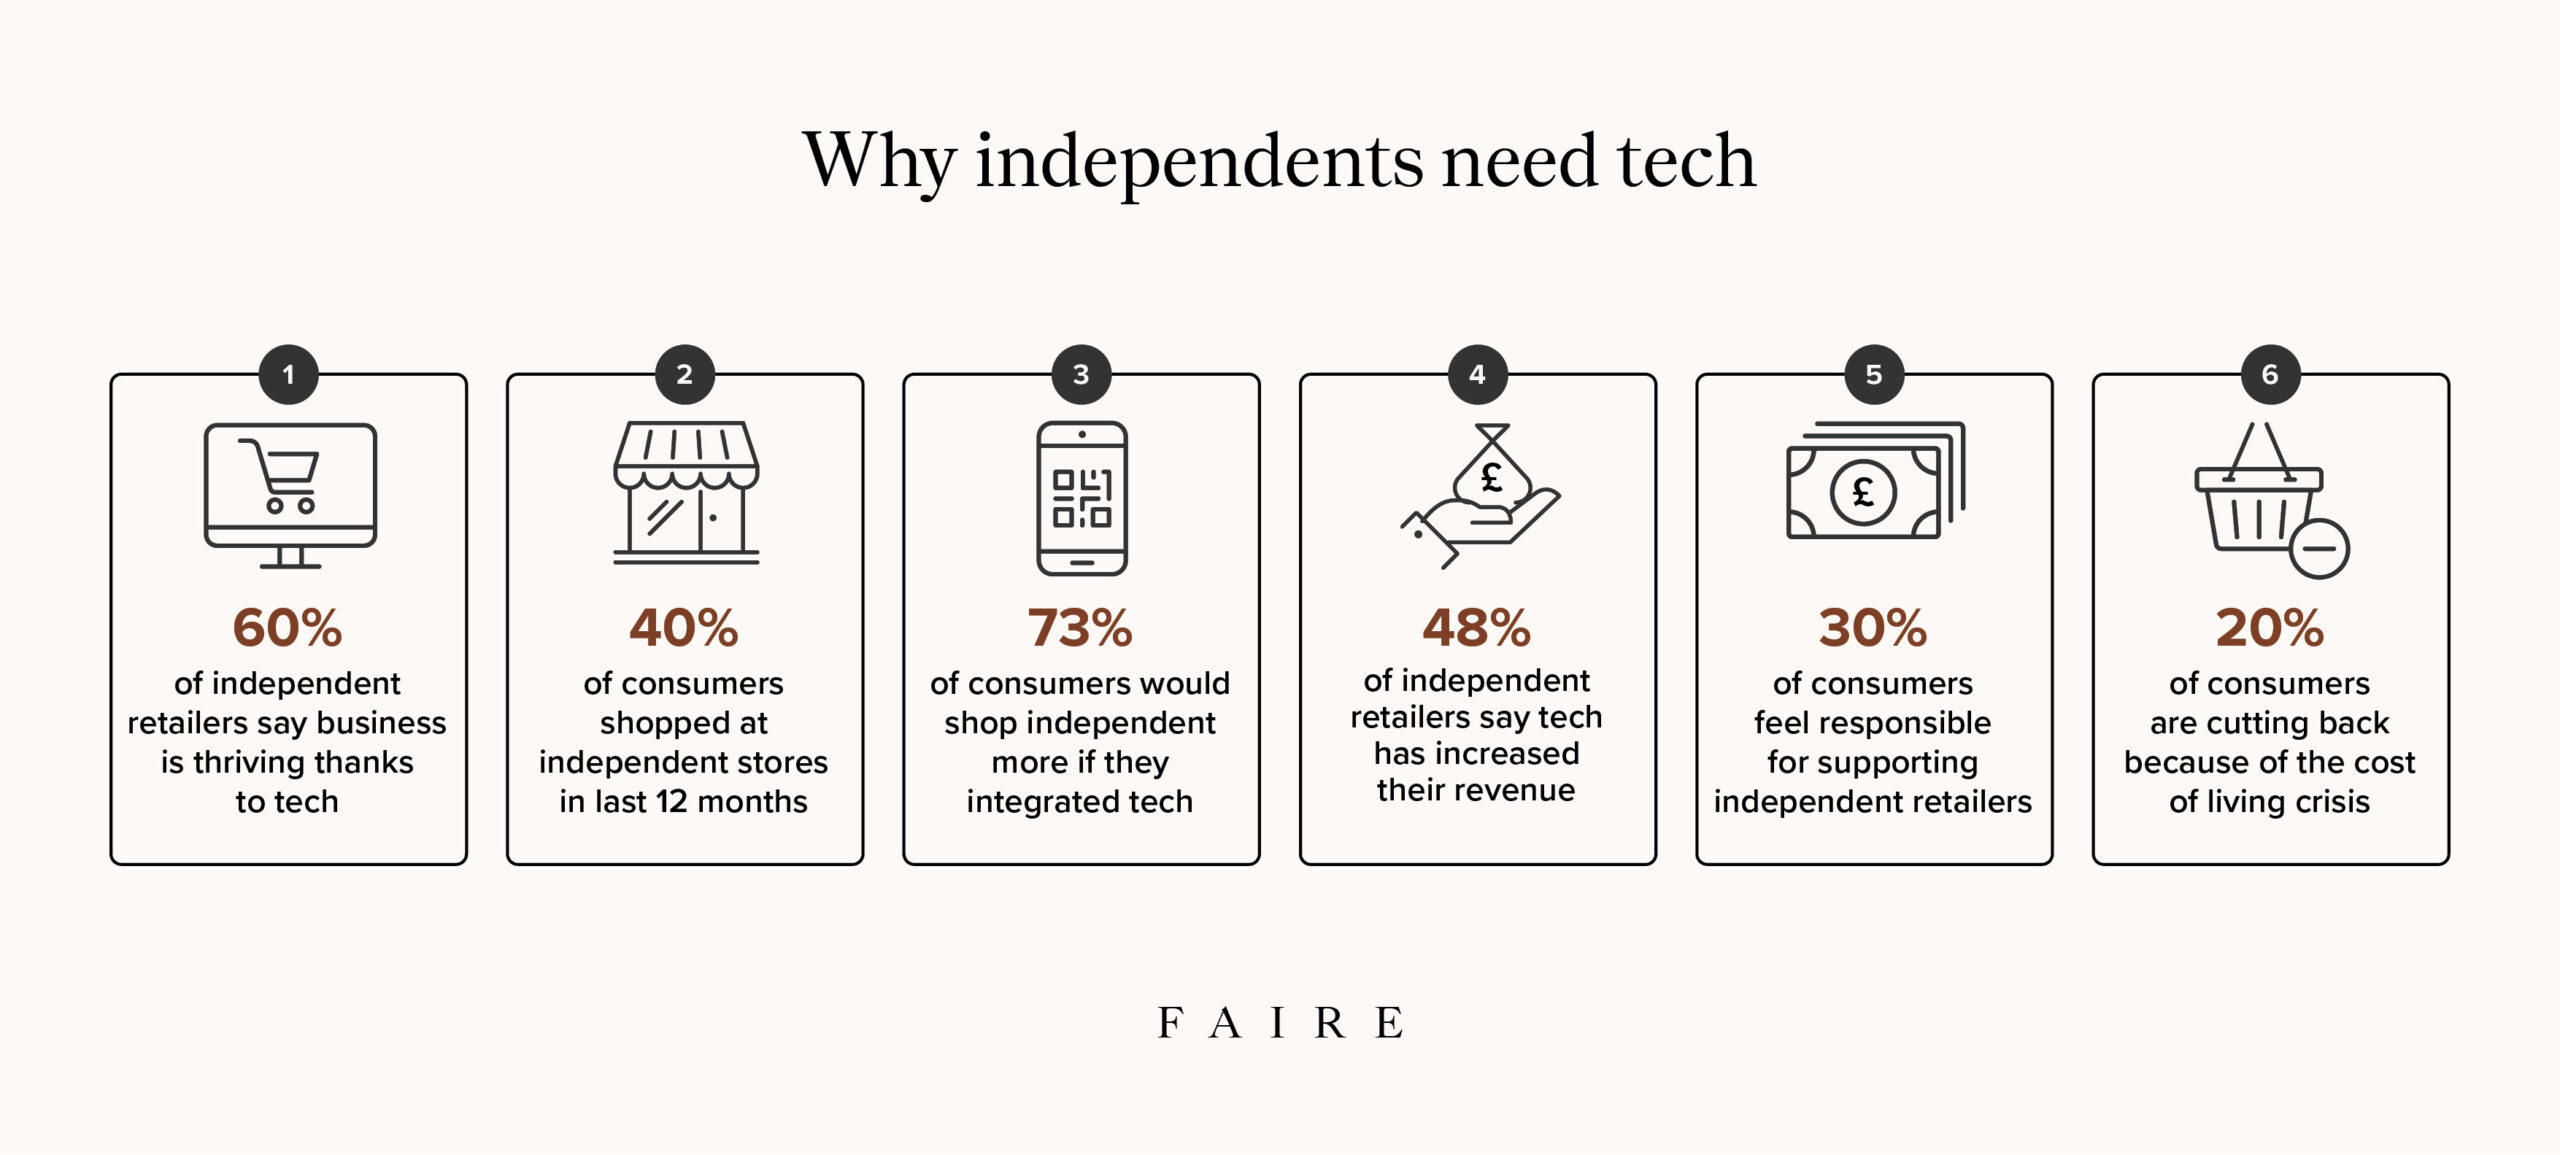 An infographic showcasing the benefits of technology for independent retailers